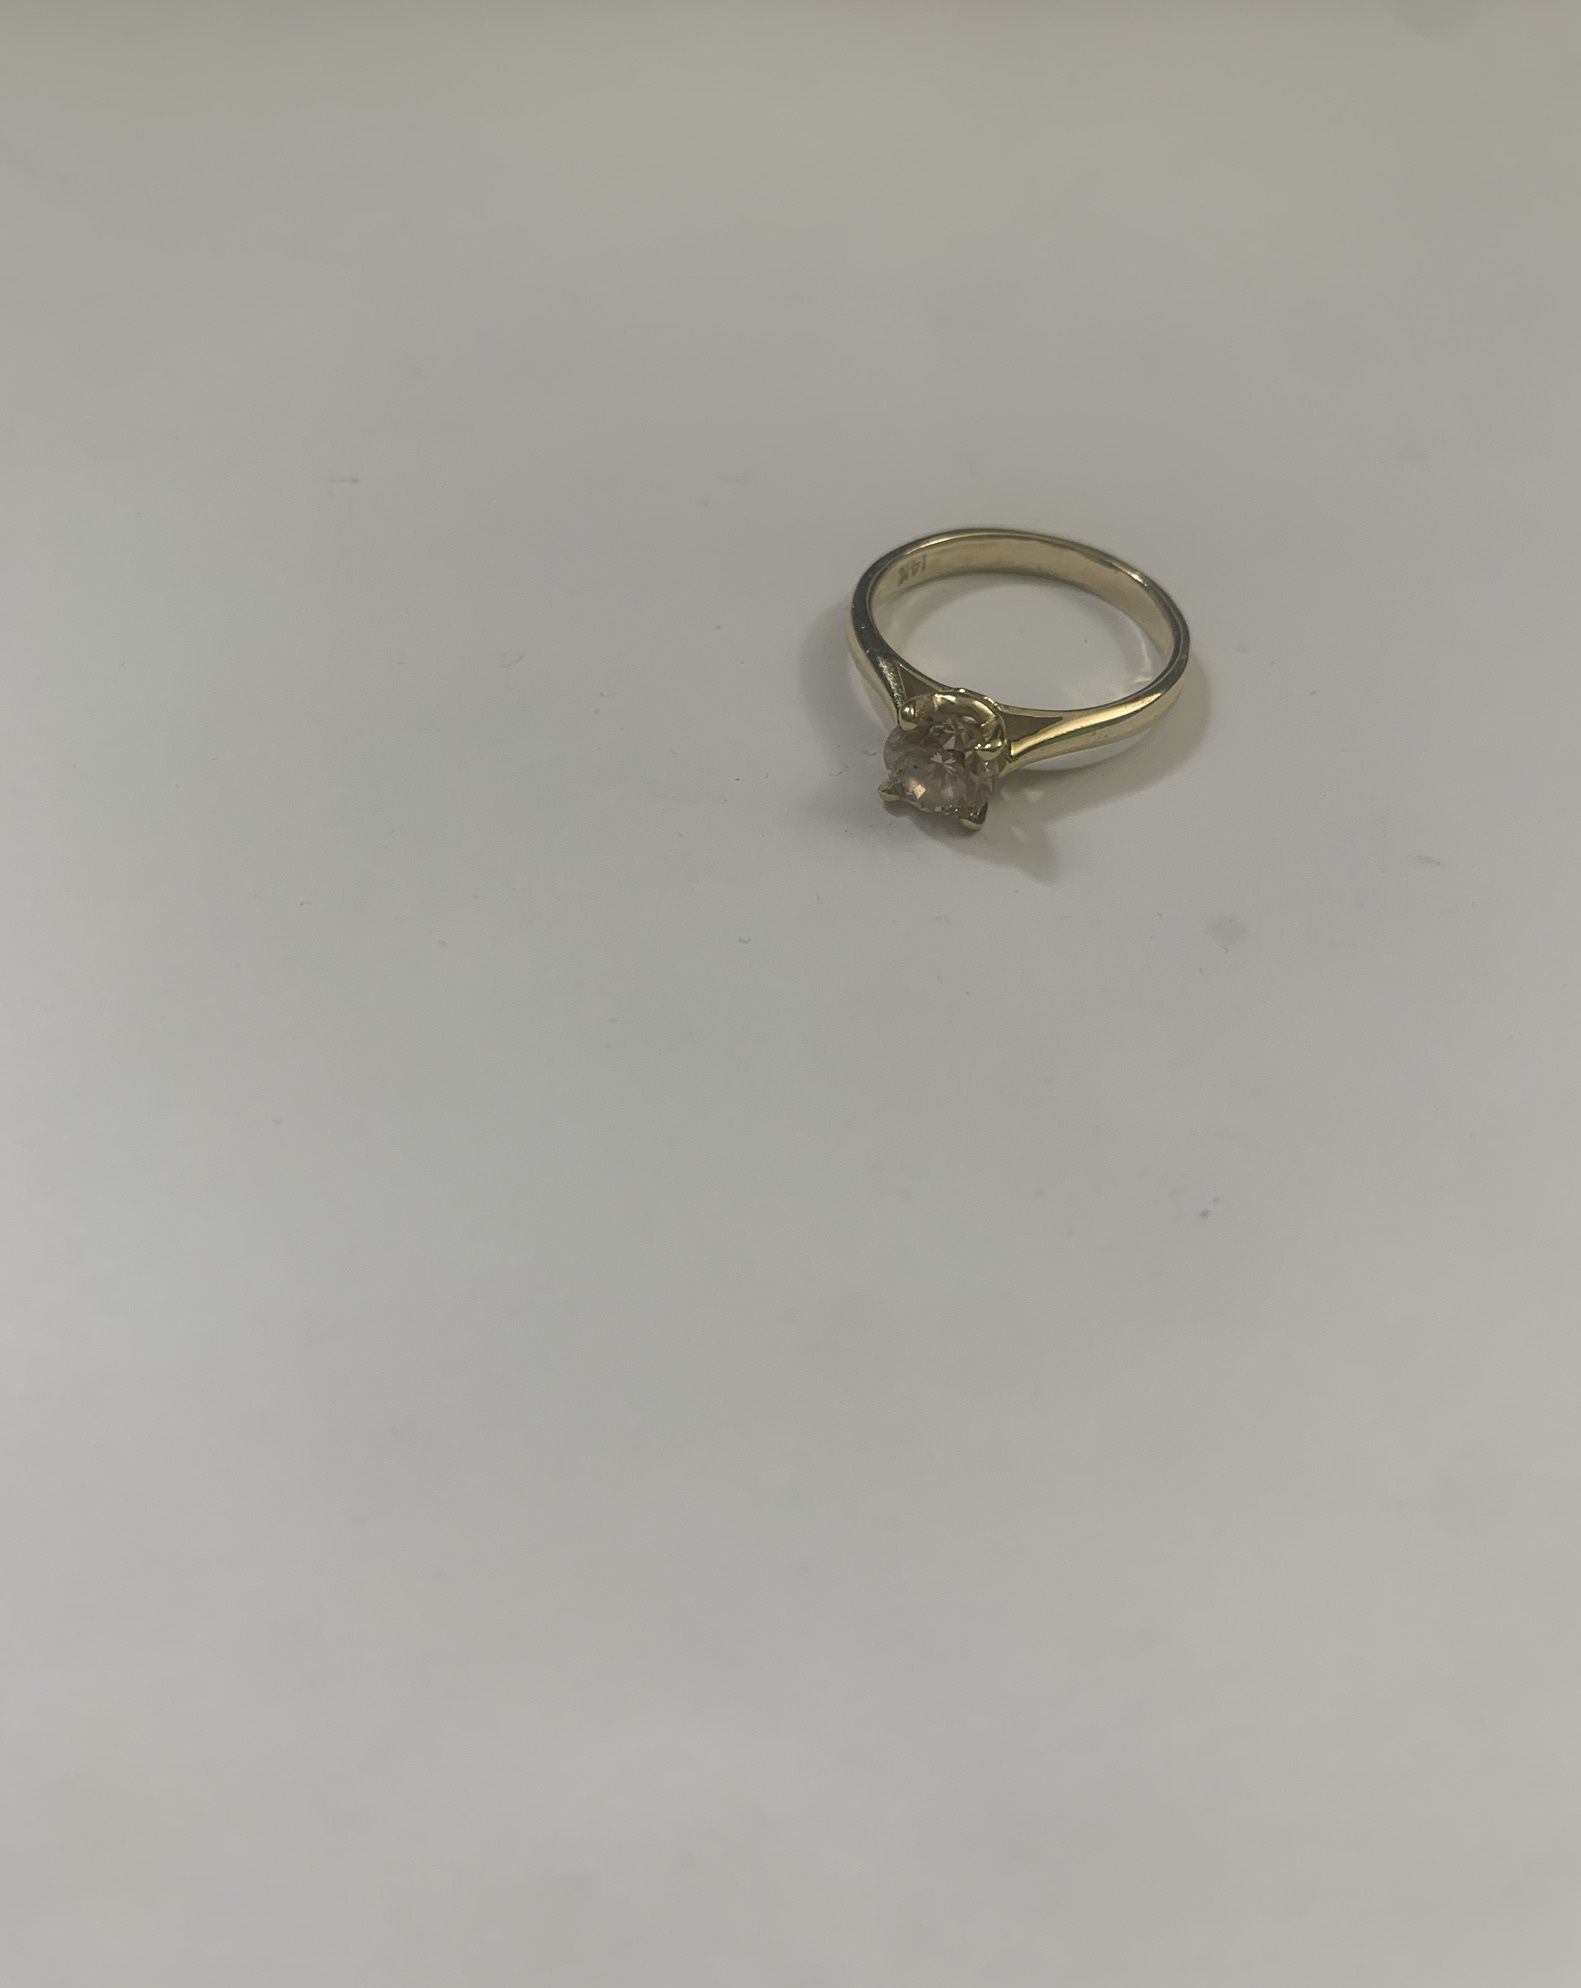 14k Yellow Gold Solitaire Engagement Ring